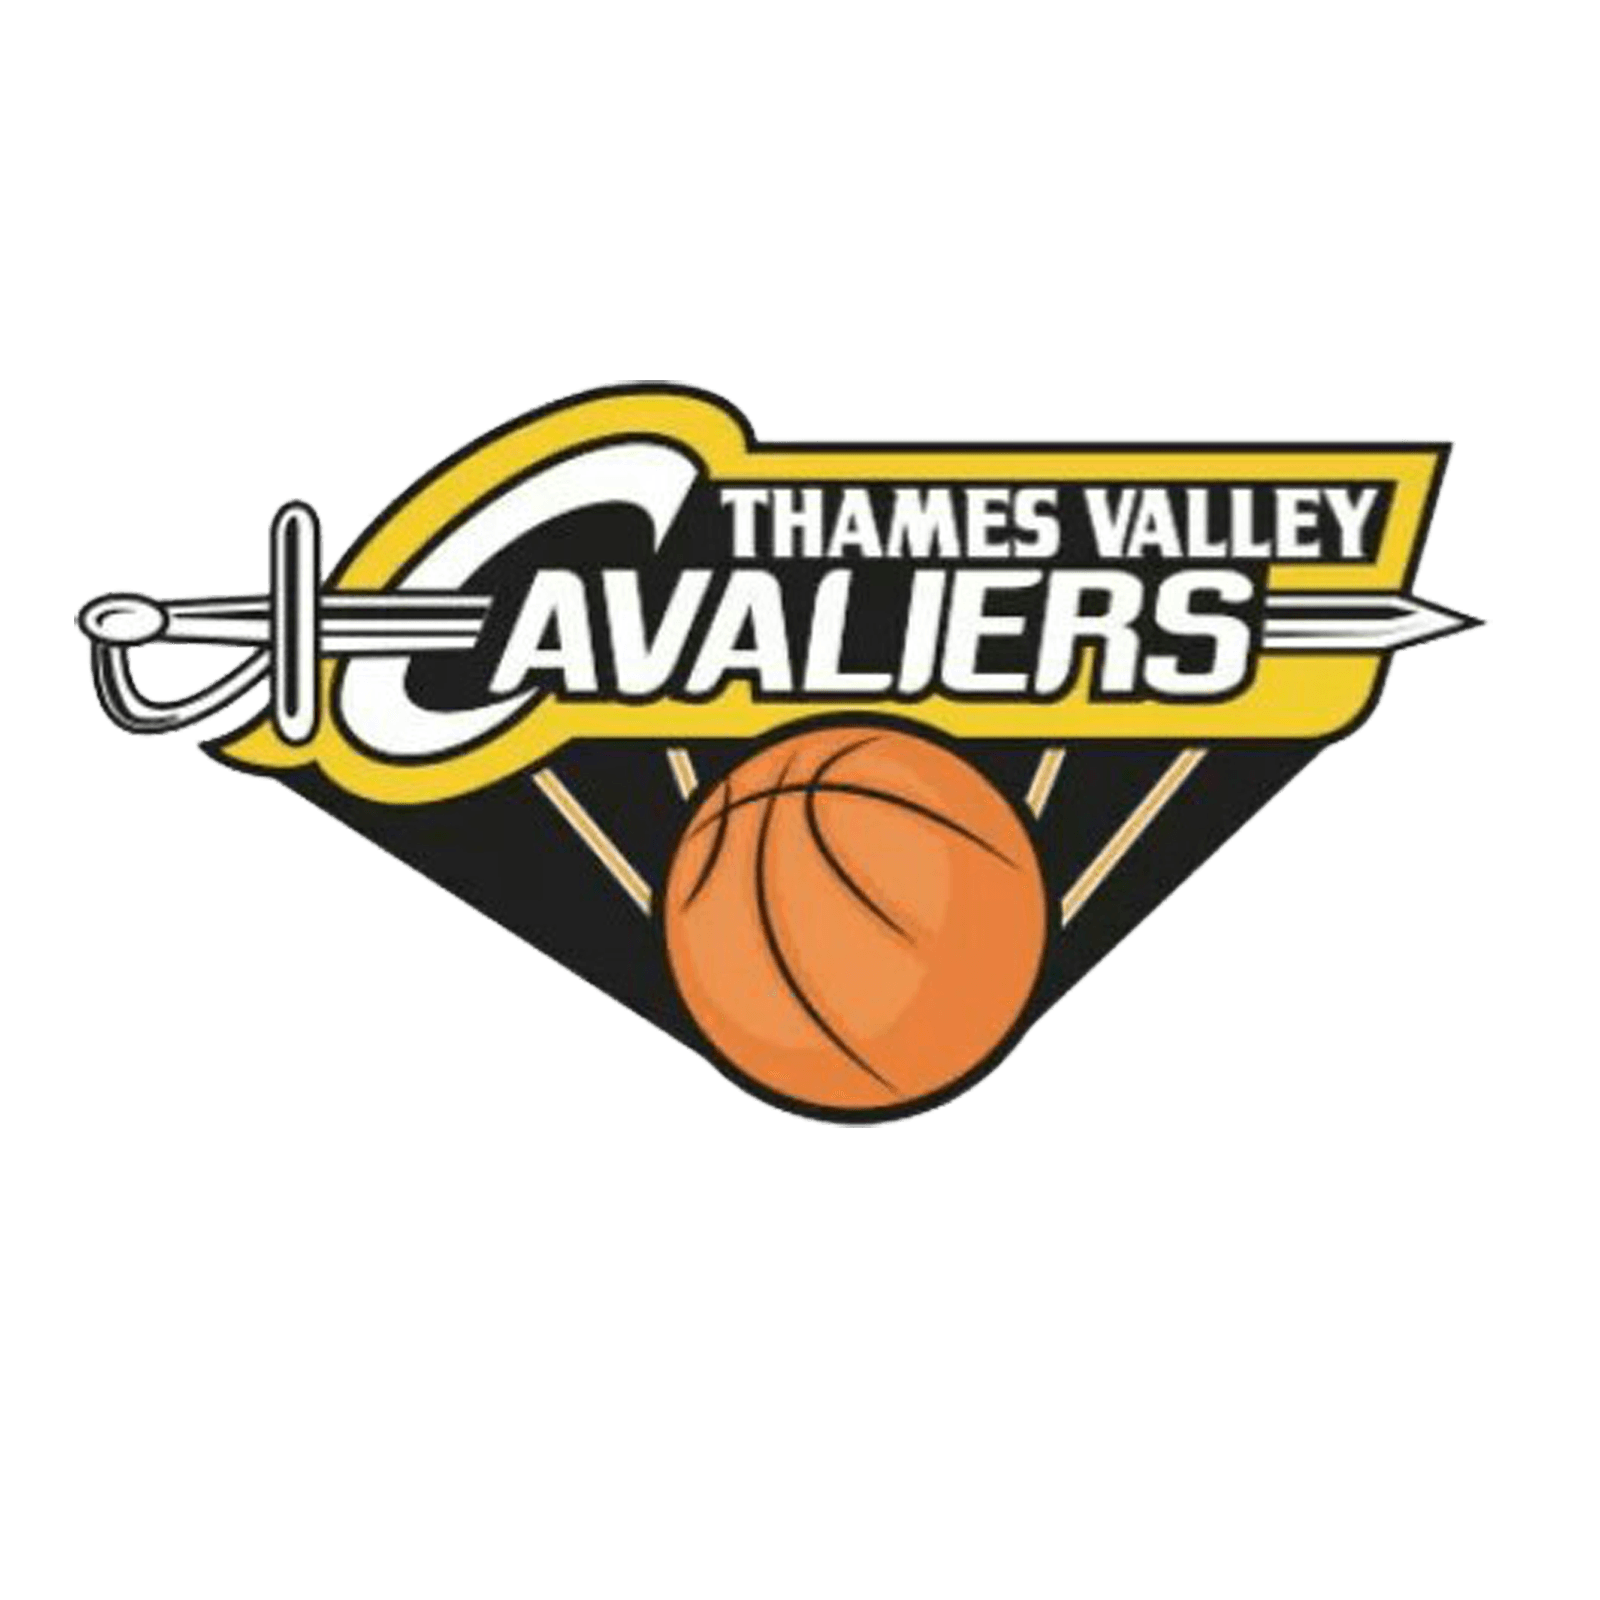 Thames Valley Cavaliers